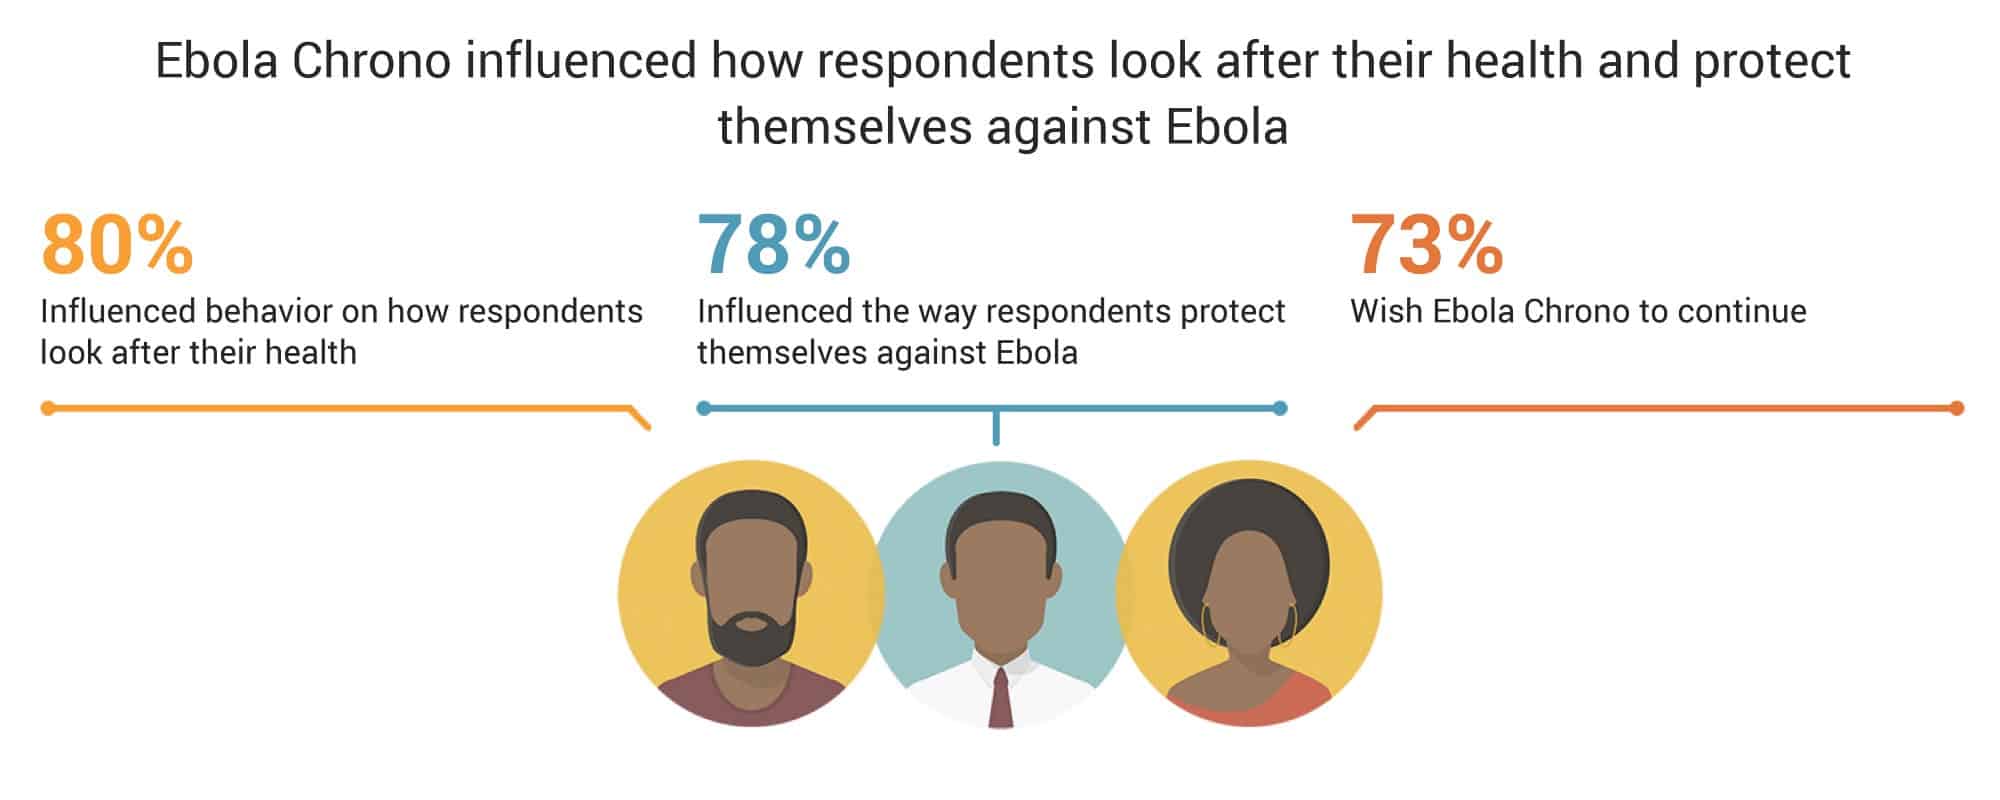 Infographic showing that Ebola Chrono influenced how respondents look after their health